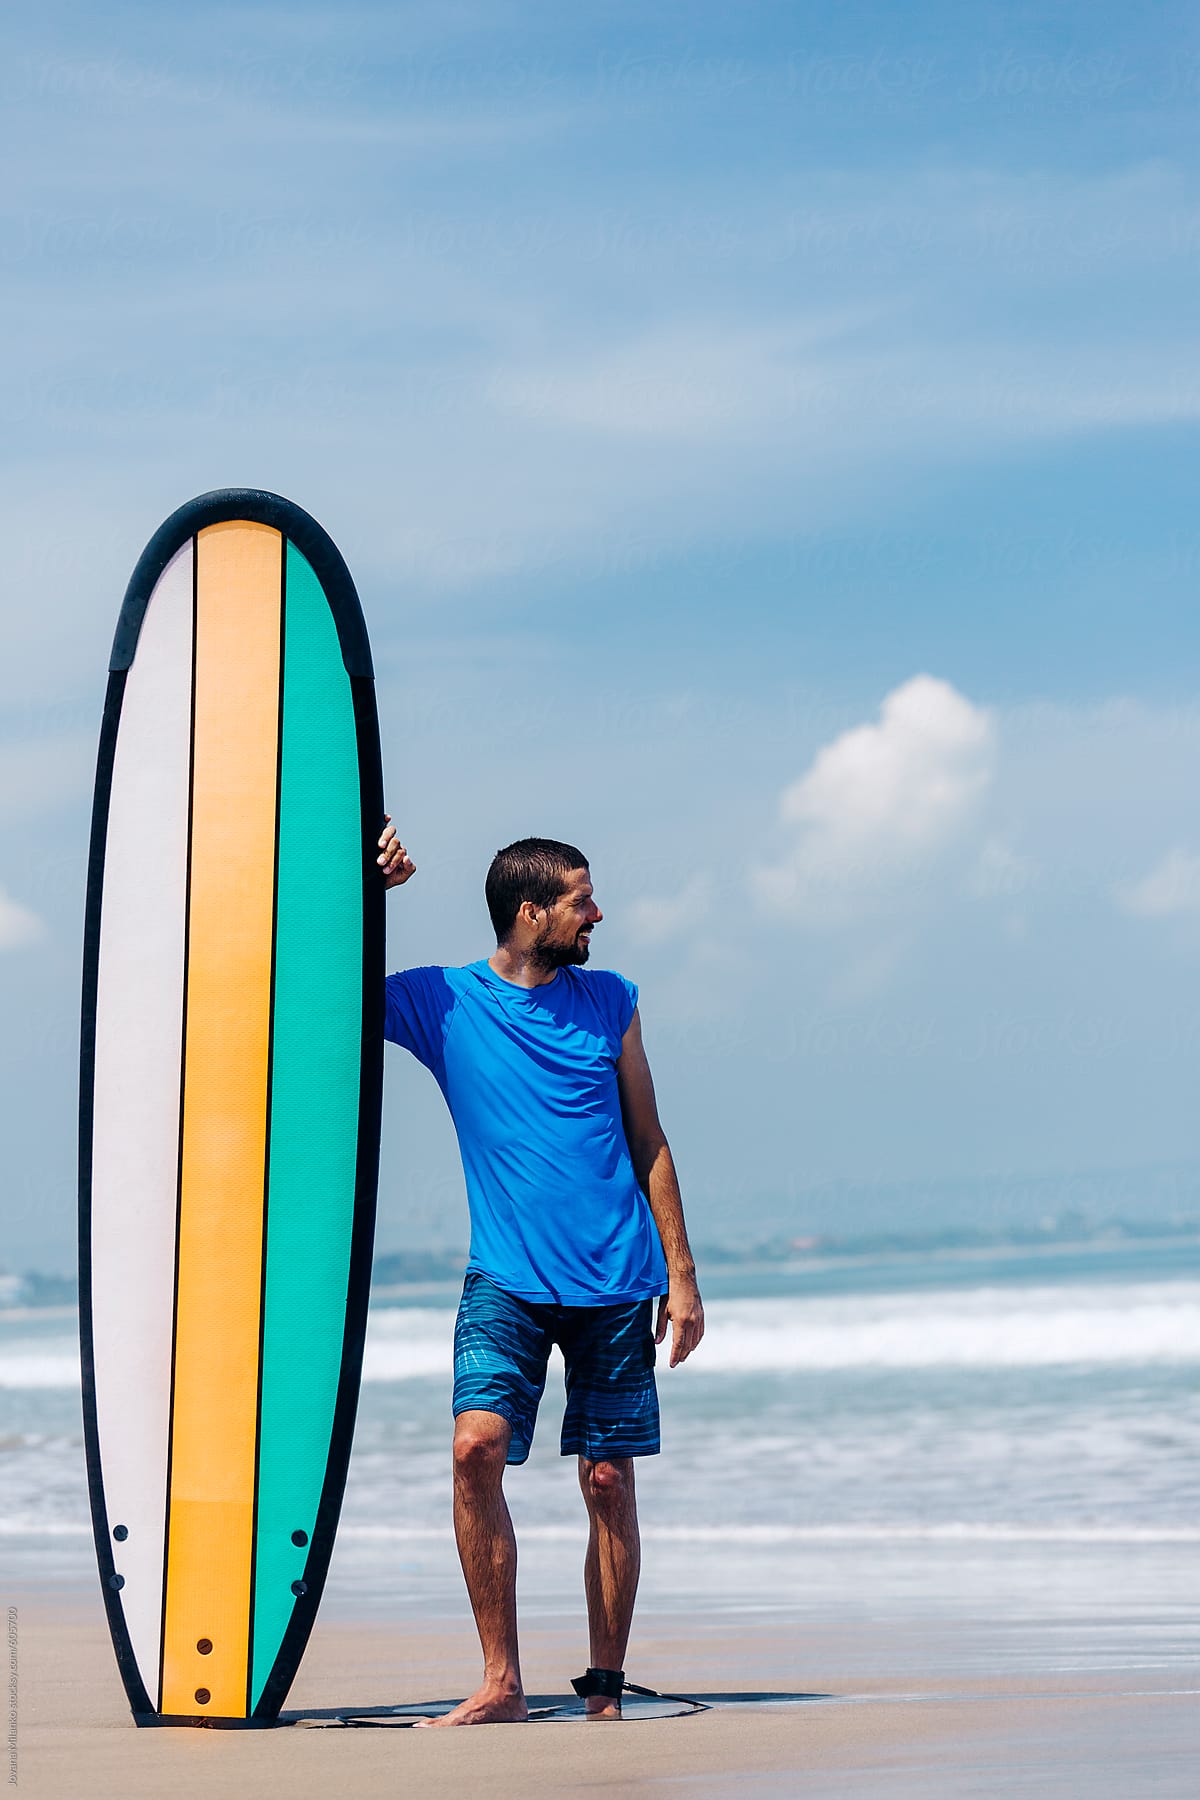 Young surfer standing next to a longboard at a surfing beach